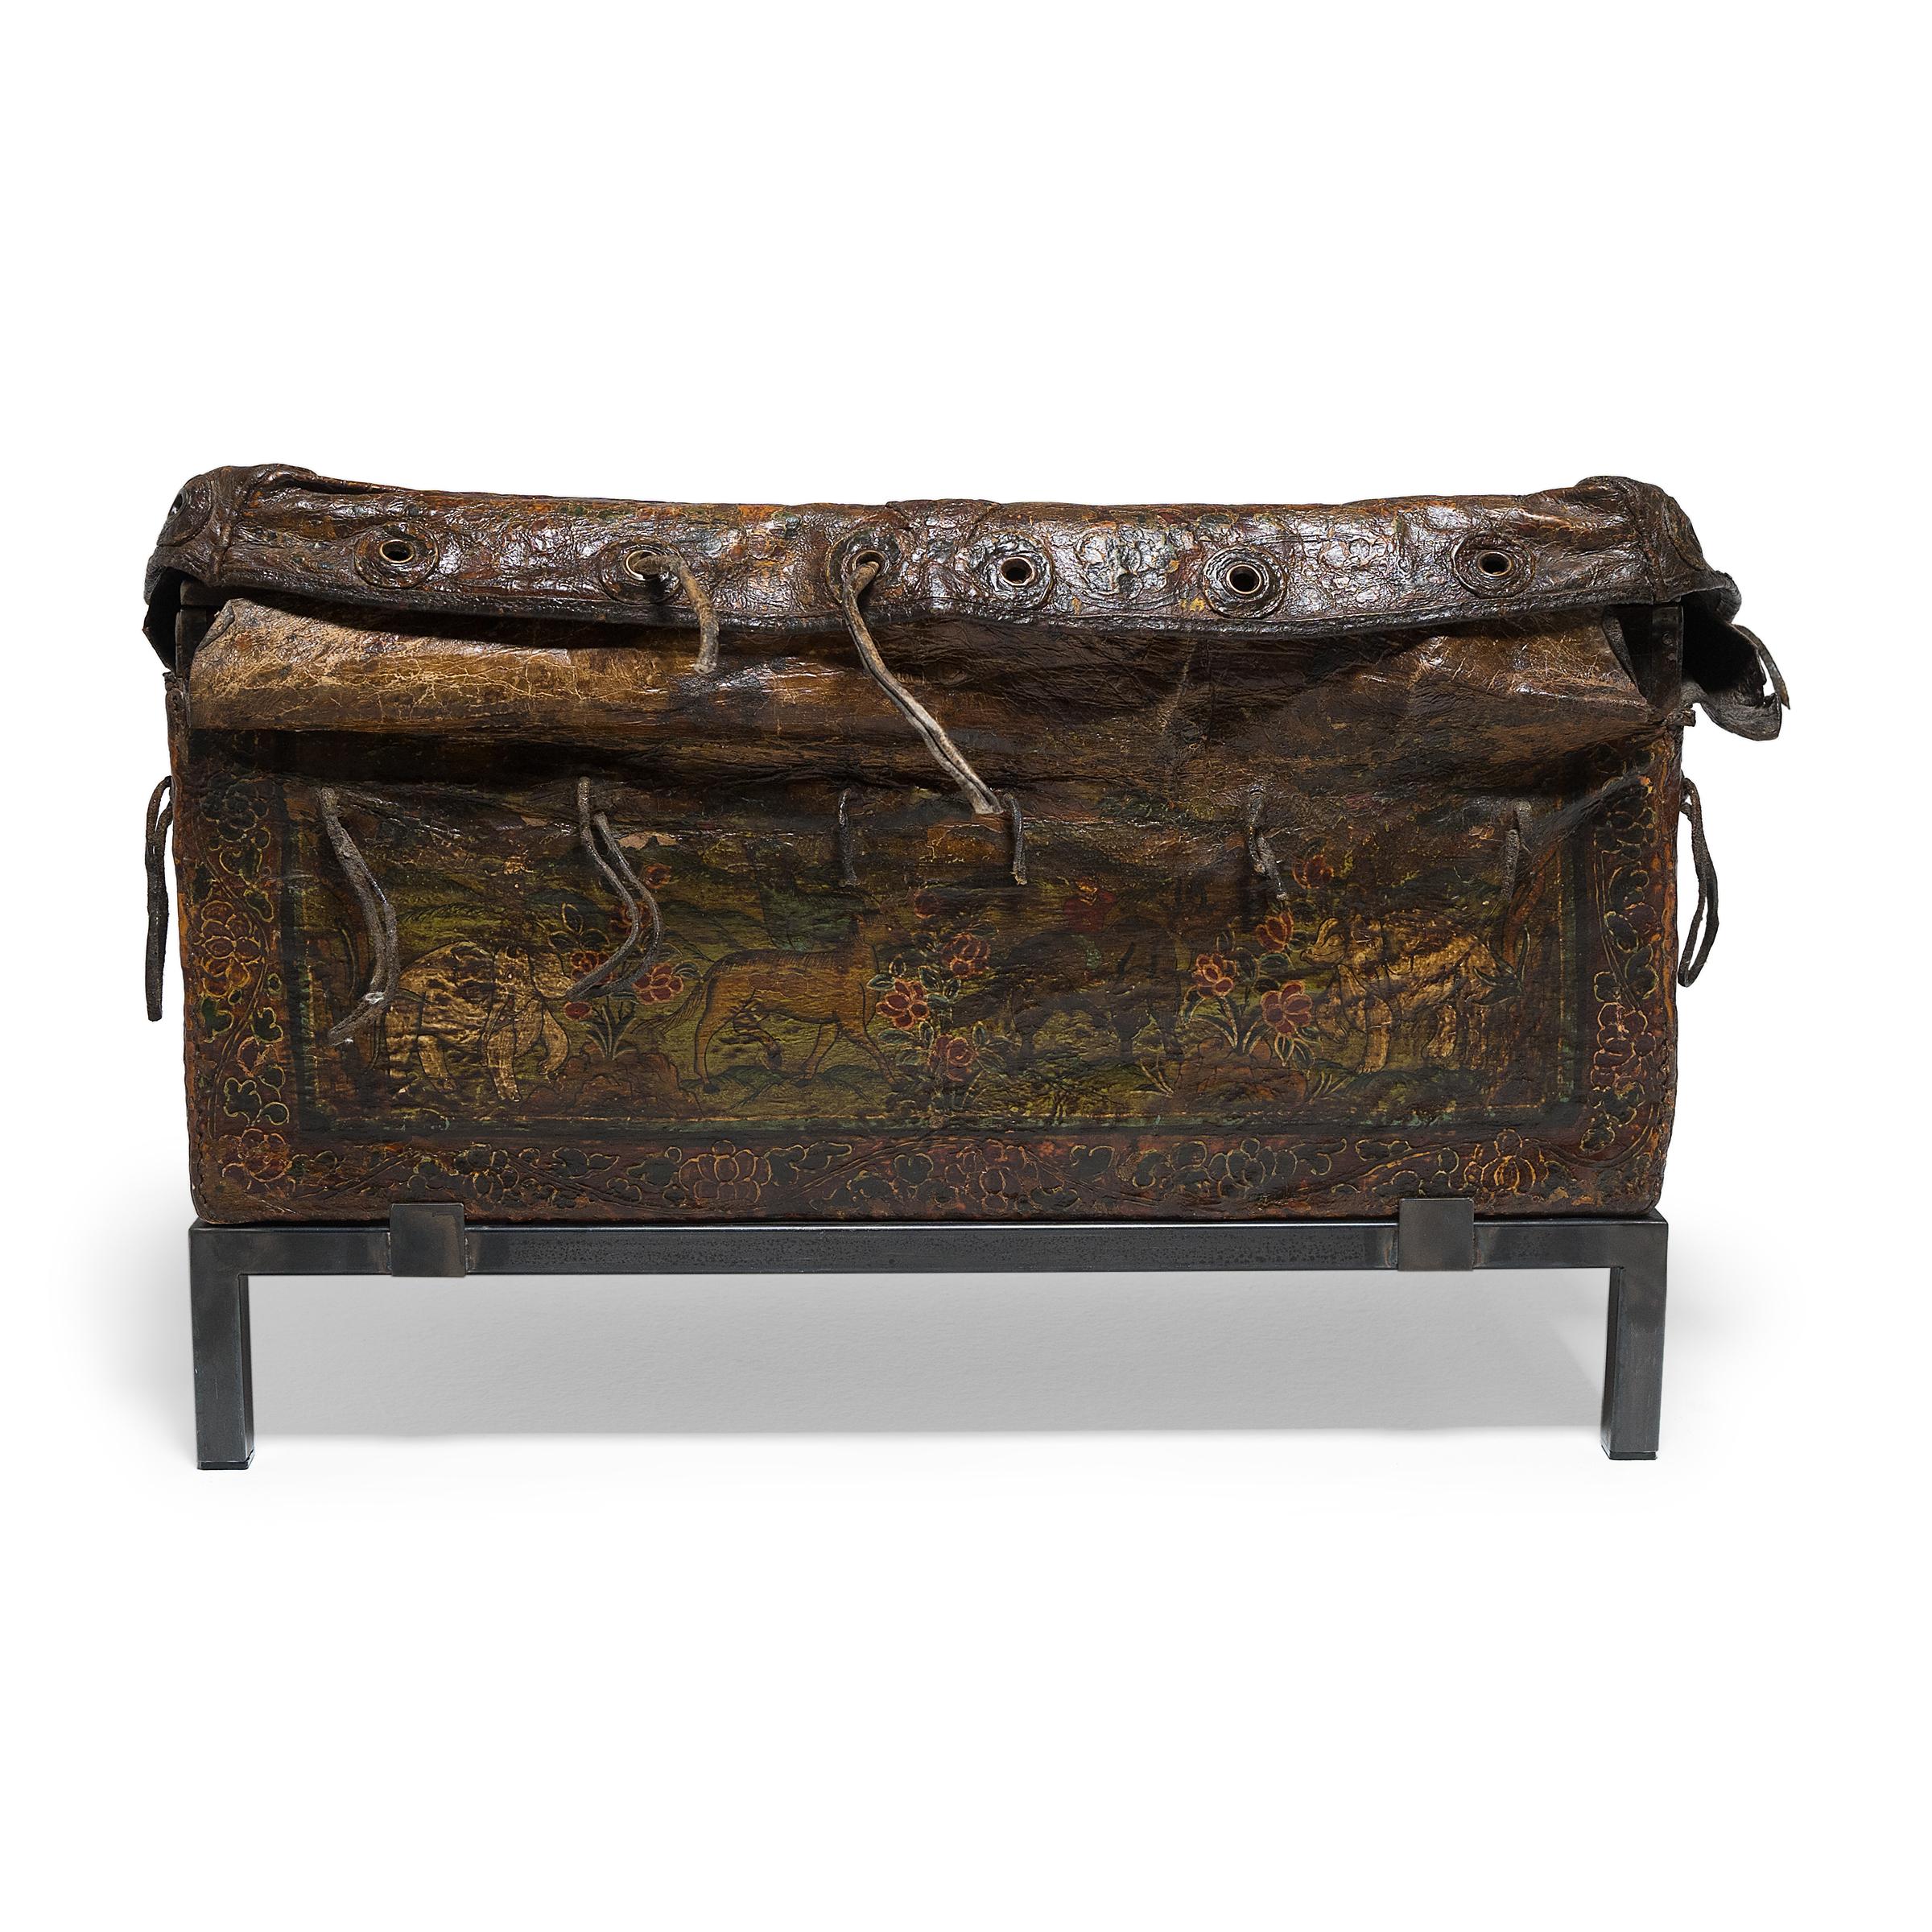 This antique traveler's chest from Tibet or Mongolia is one of the most unique trunks we've come across in our 20 years of collecting. Dated to the 19th century or earlier, the wooden trunk is enclosed by a lacquered hide sheath that folds across